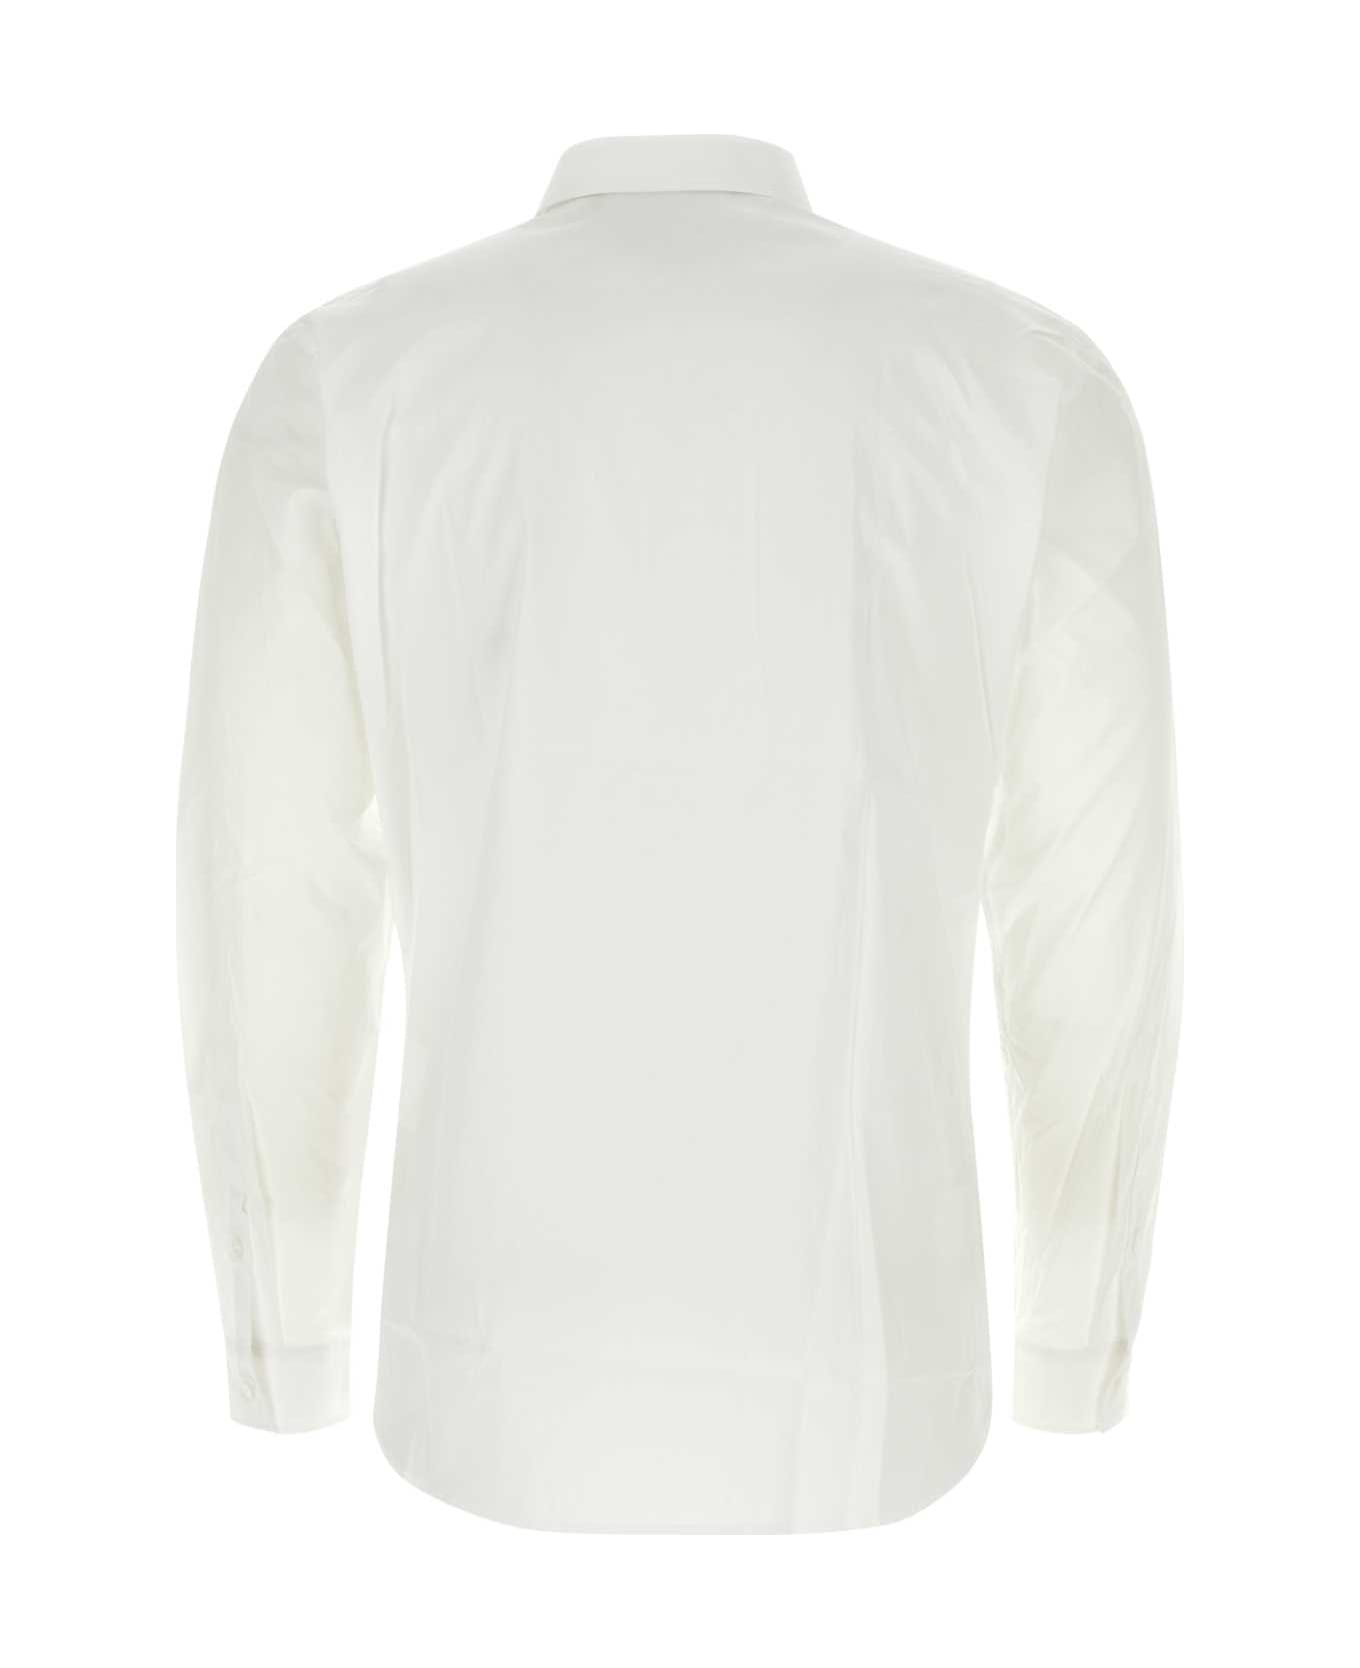 Versace Jeans Couture White Poplin Shirt - White